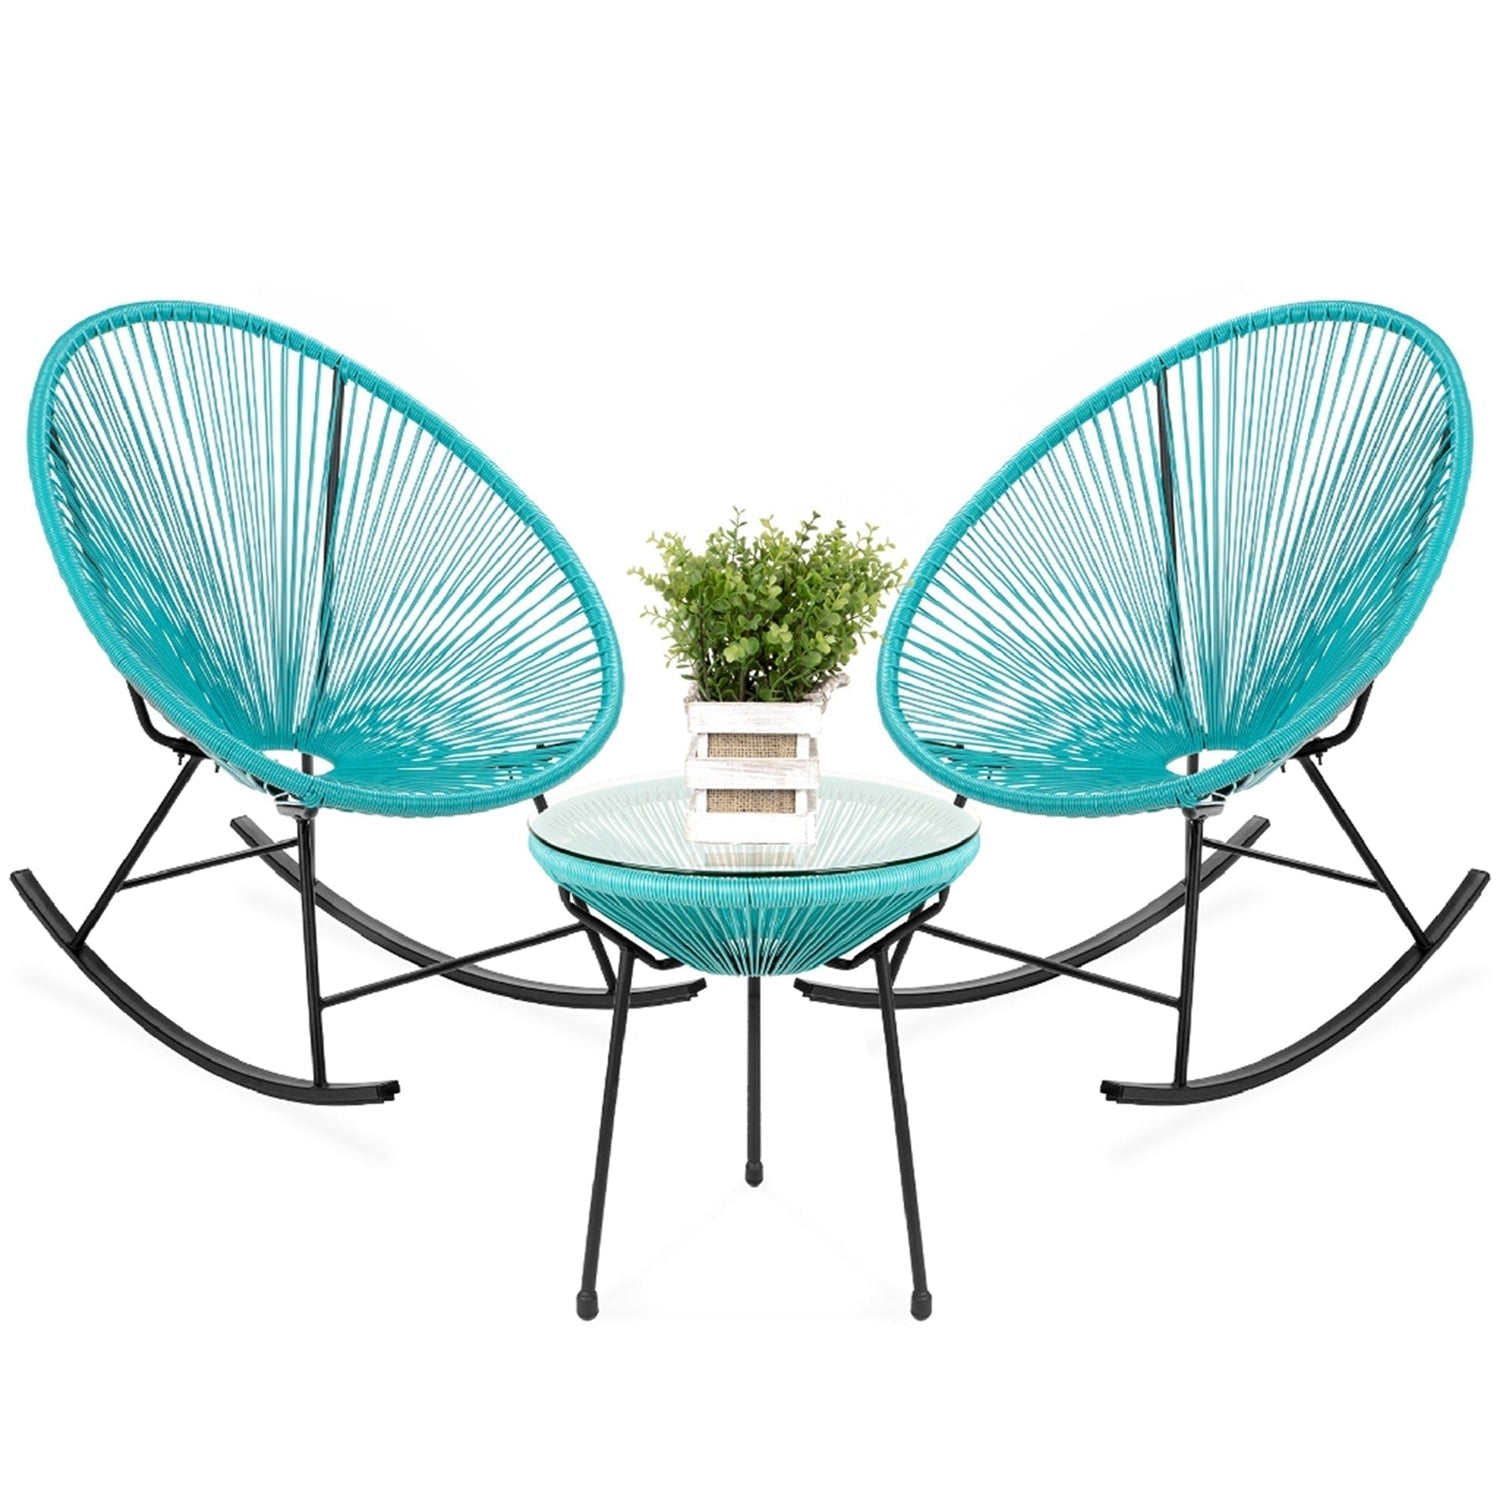 3 Piece Teal Oval Patio Woven Rocking Chair Bistro Set-Novel Home